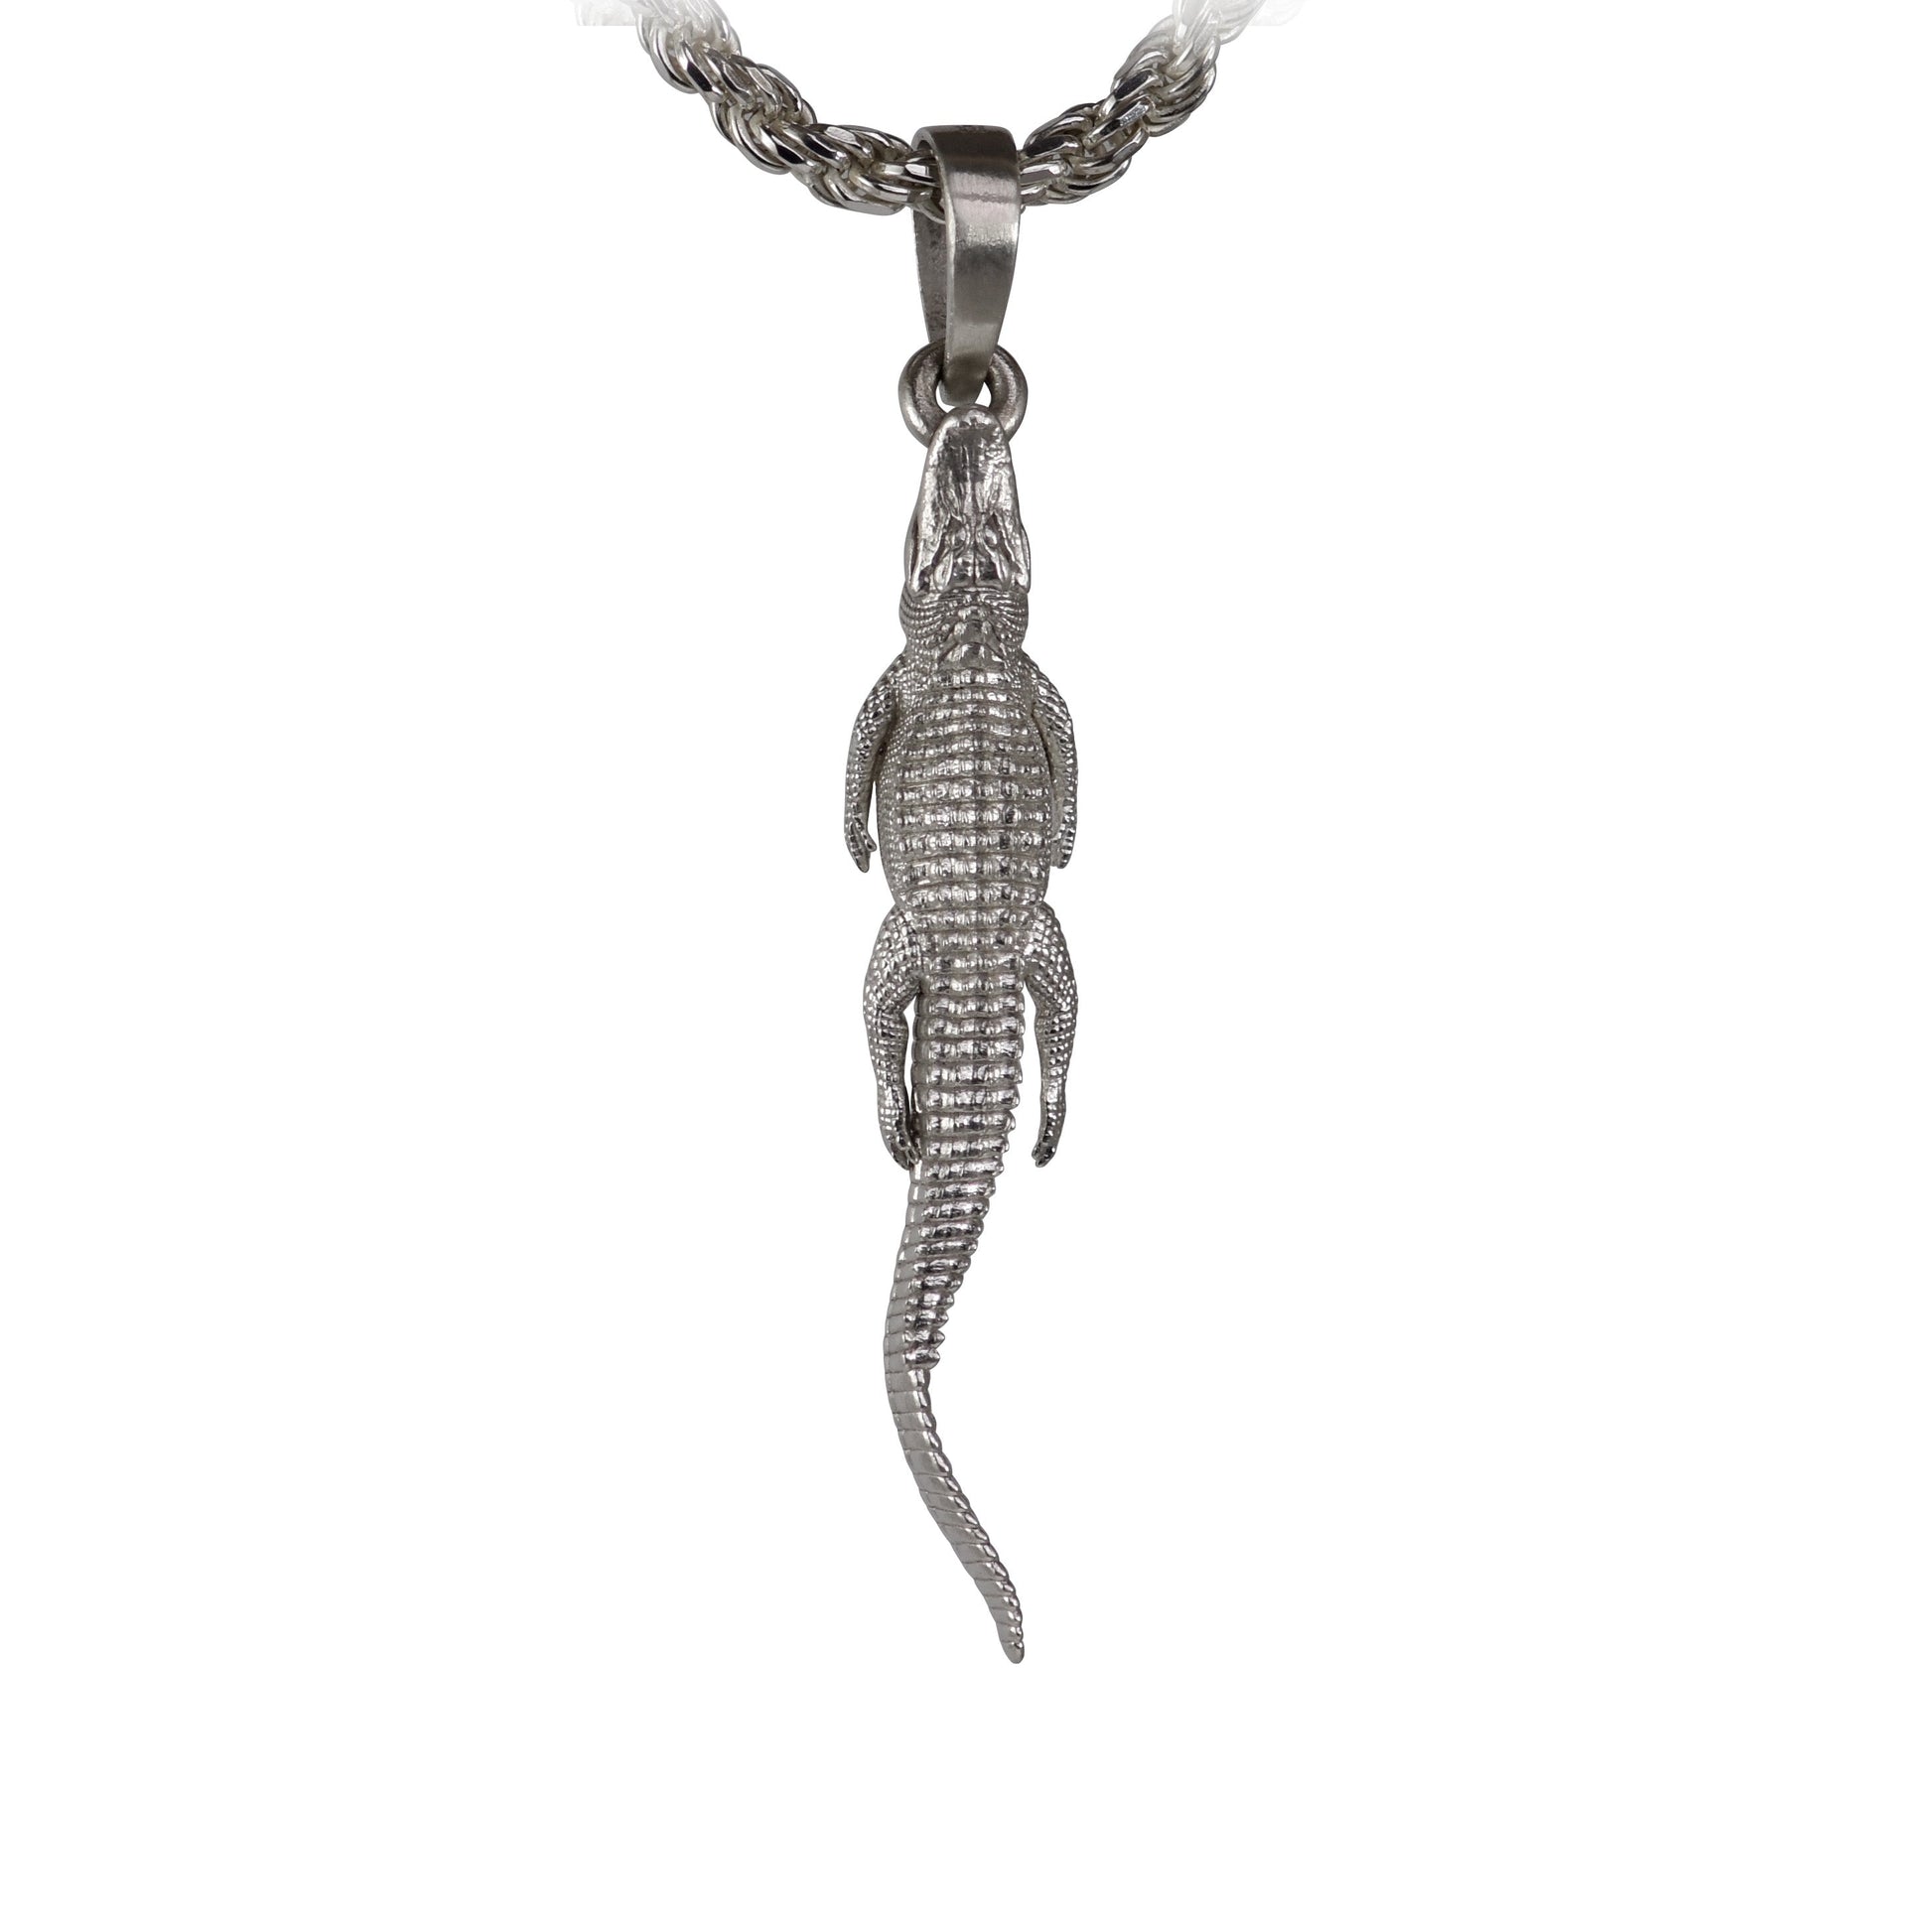 American Alligator On The Hunt Pendant - Large | Sea Shur Jewelry 14K Rose Gold Solid